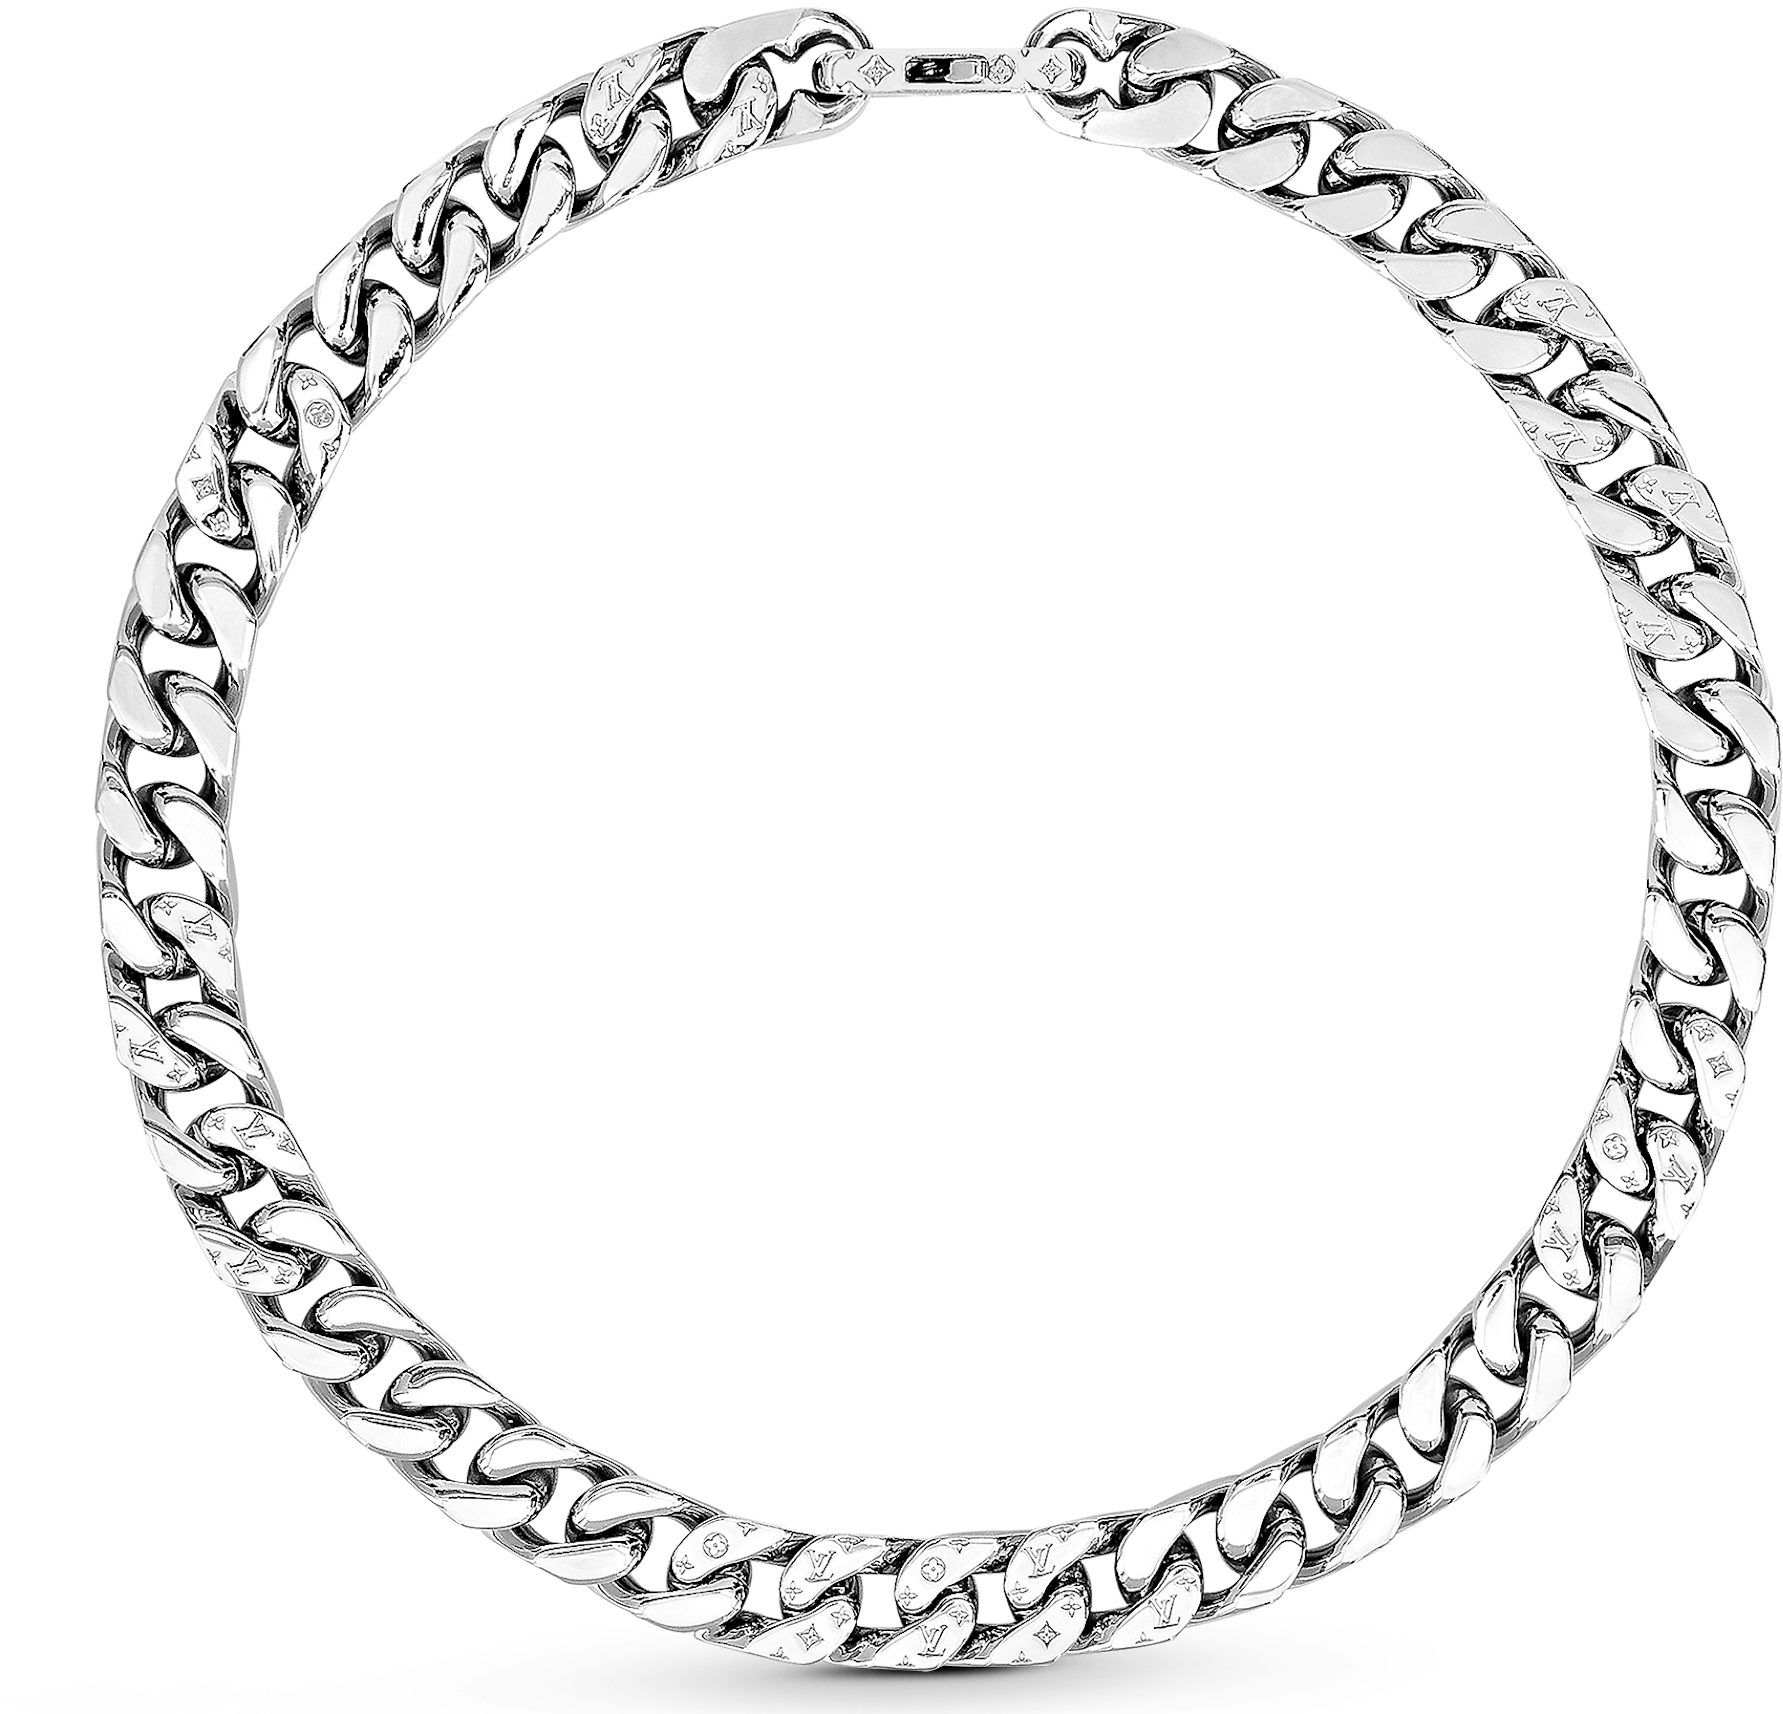 Louis Vuitton Necklace Chain Links Silver in Silver-tone Metal